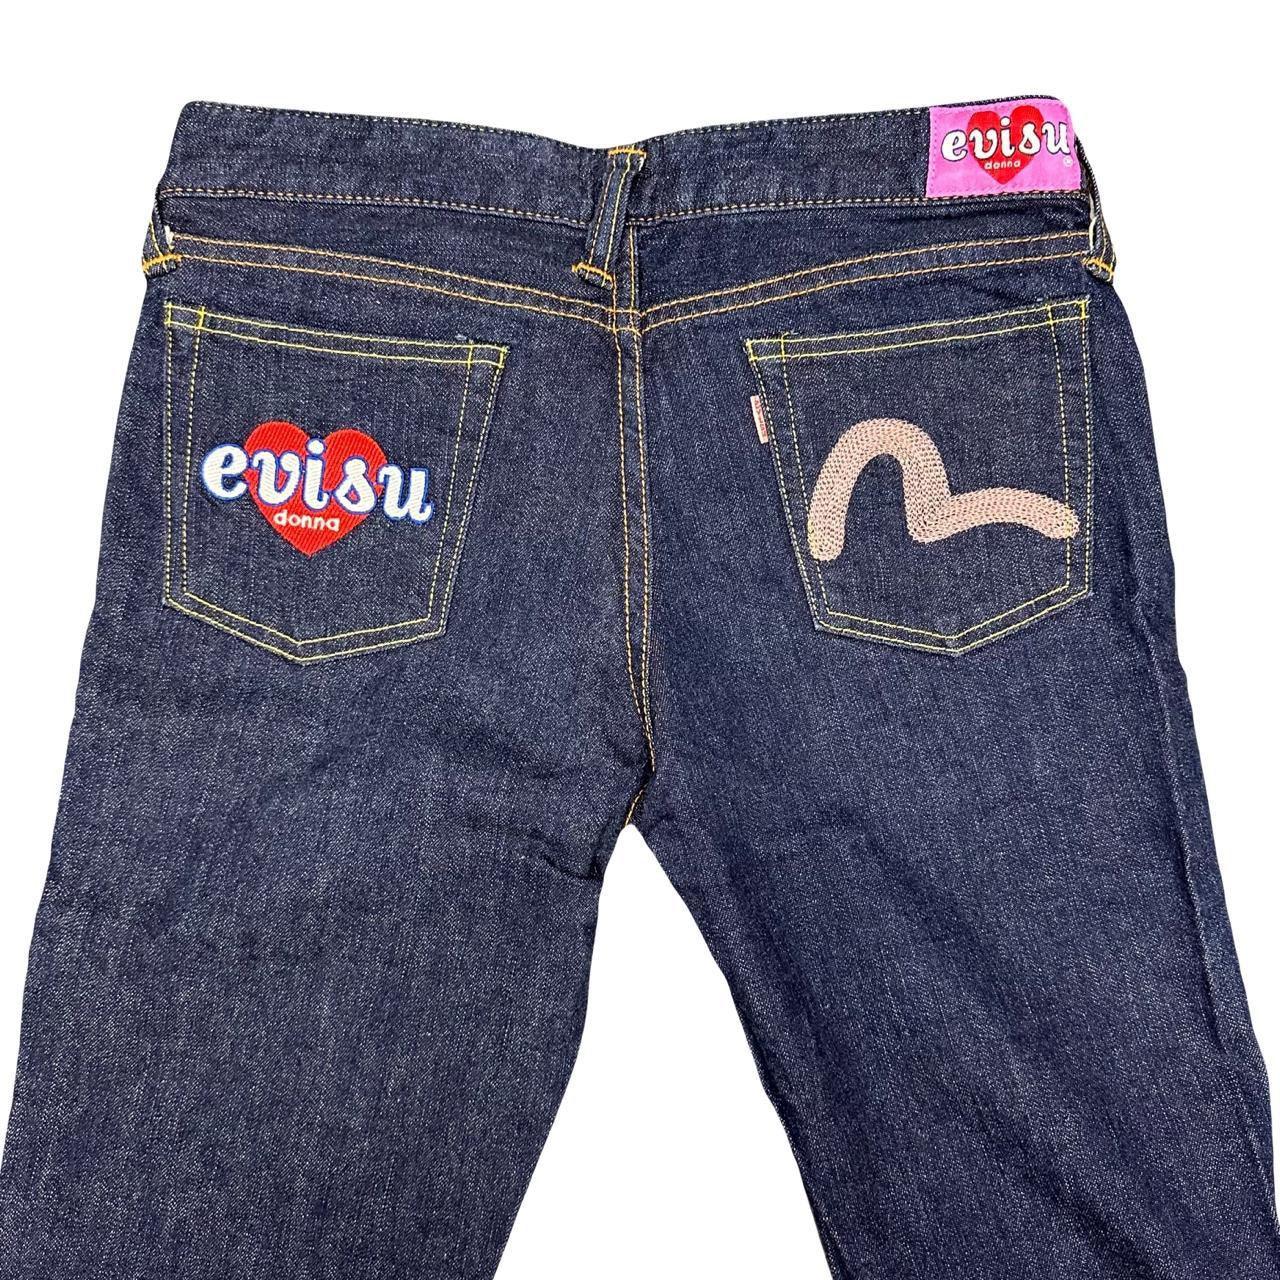 Evisu Selvedge Jeans With Loveheart & Daicock Embroidery ( W28 ) - Known Source